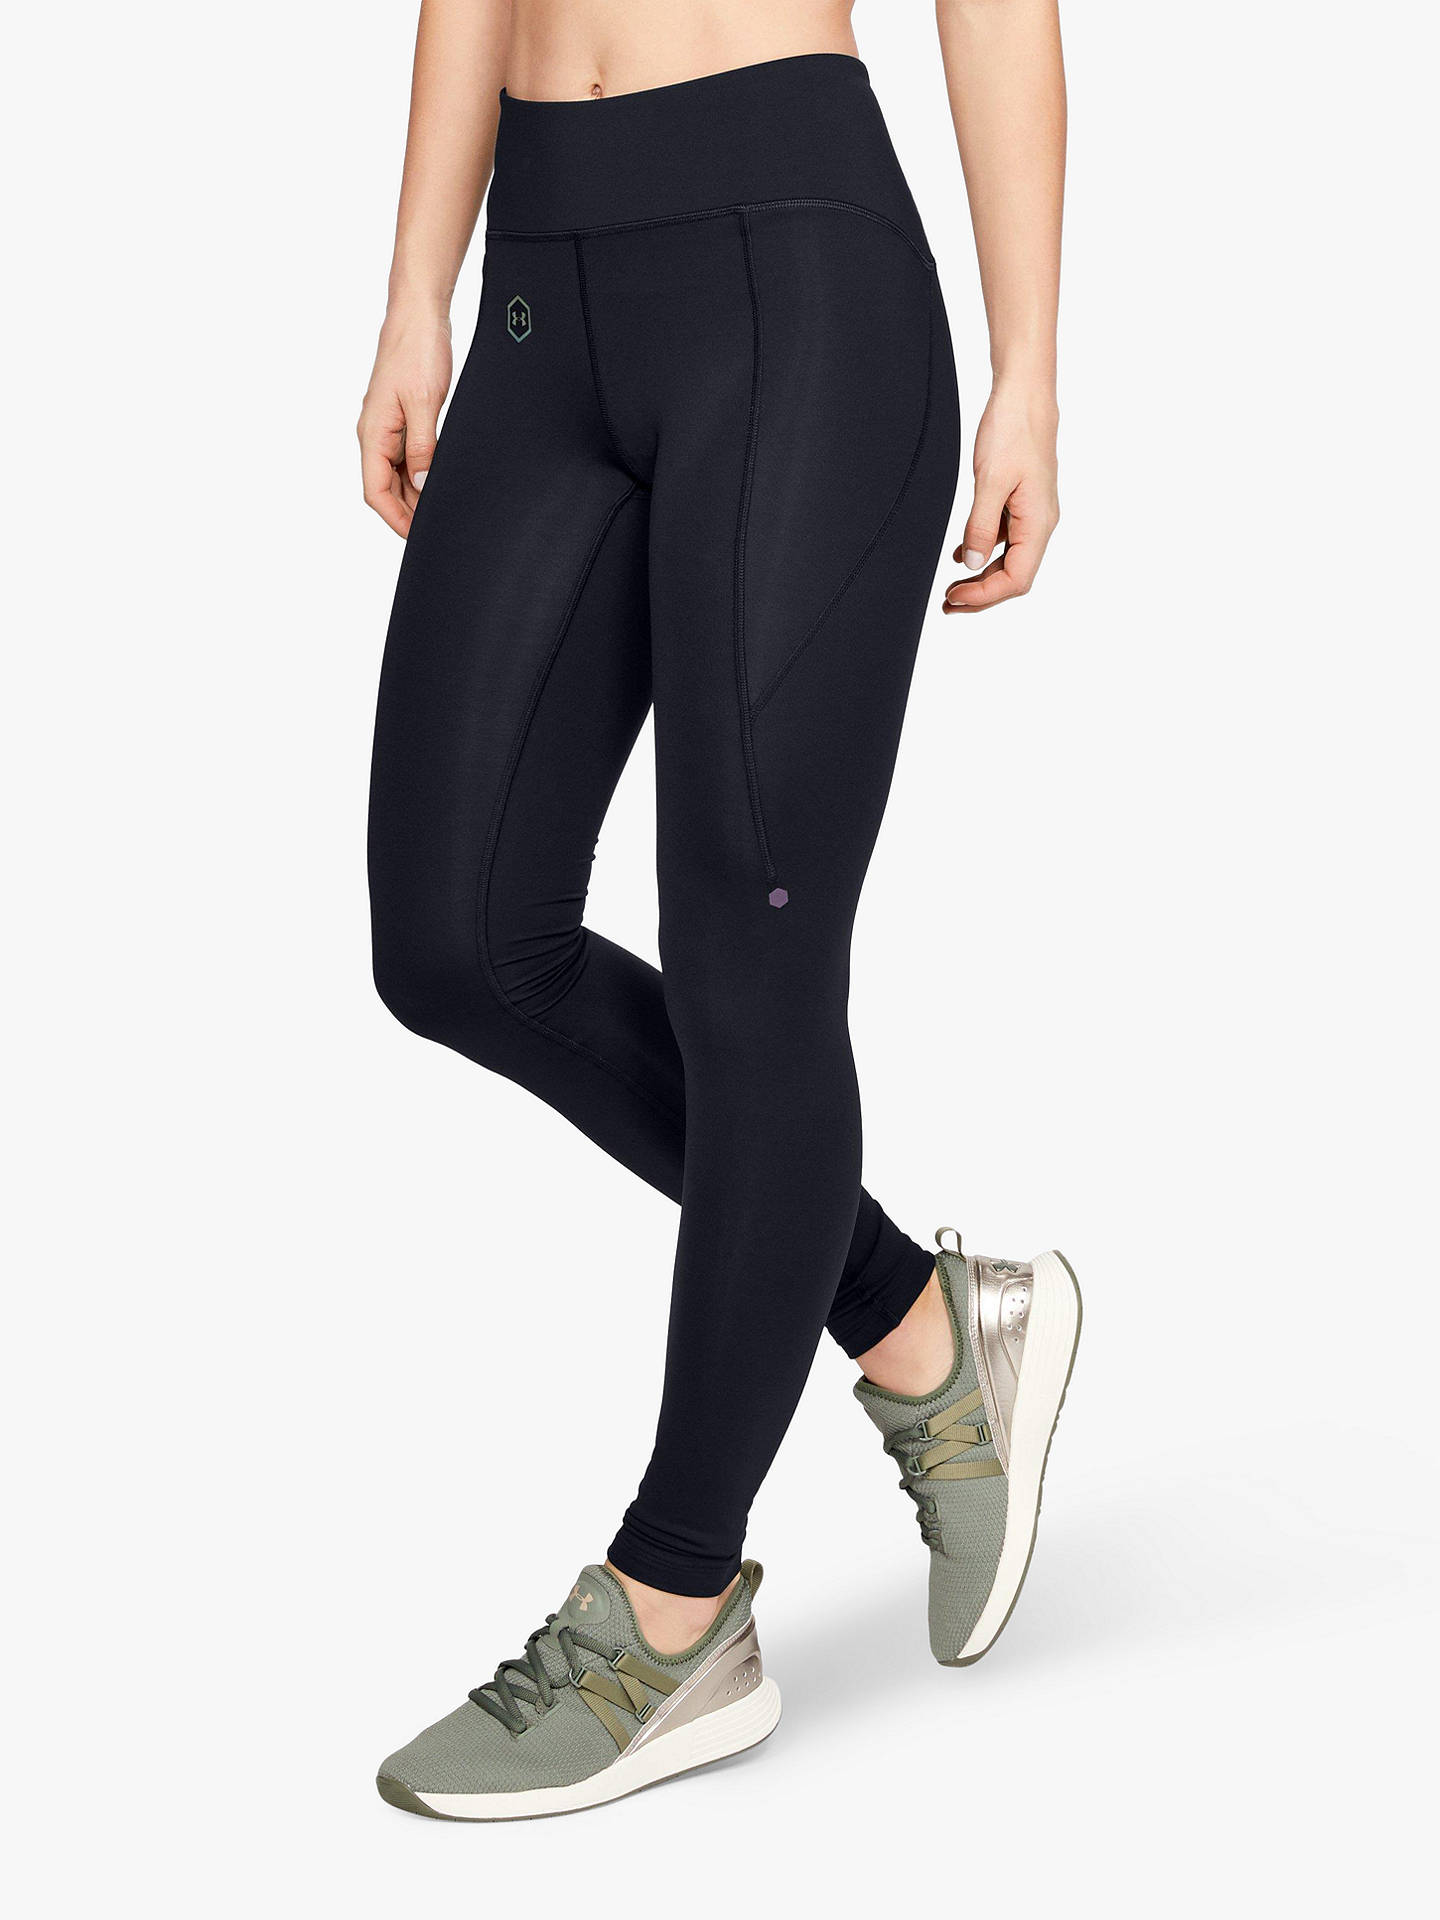 Grey Under Armour Rush Womens Long Training Tights